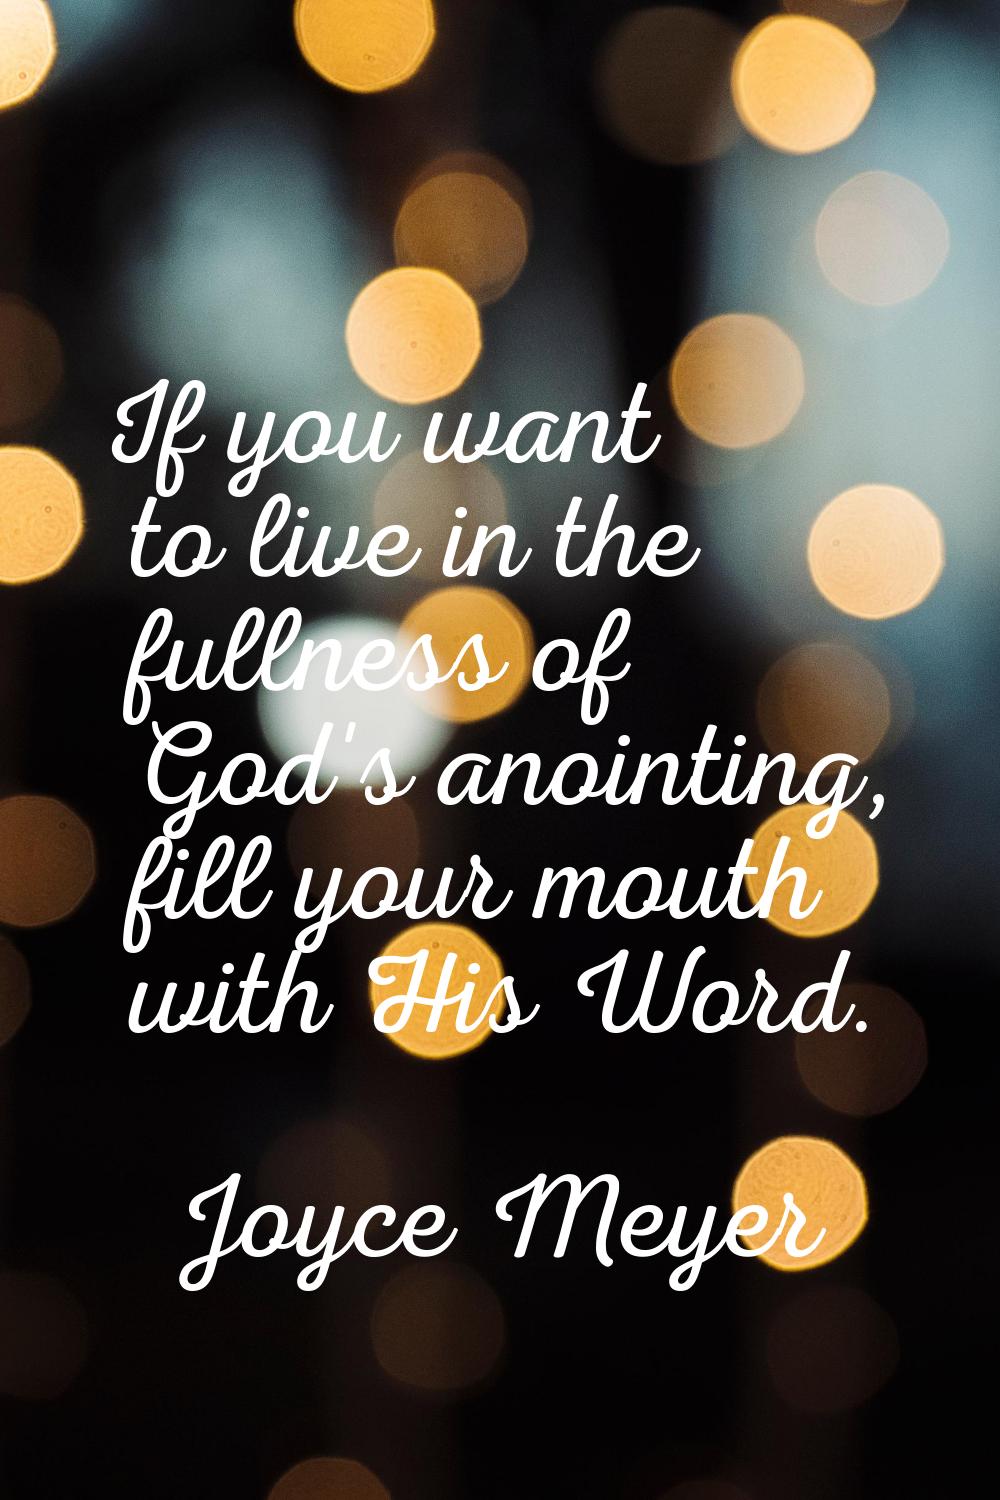 If you want to live in the fullness of God's anointing, fill your mouth with His Word.